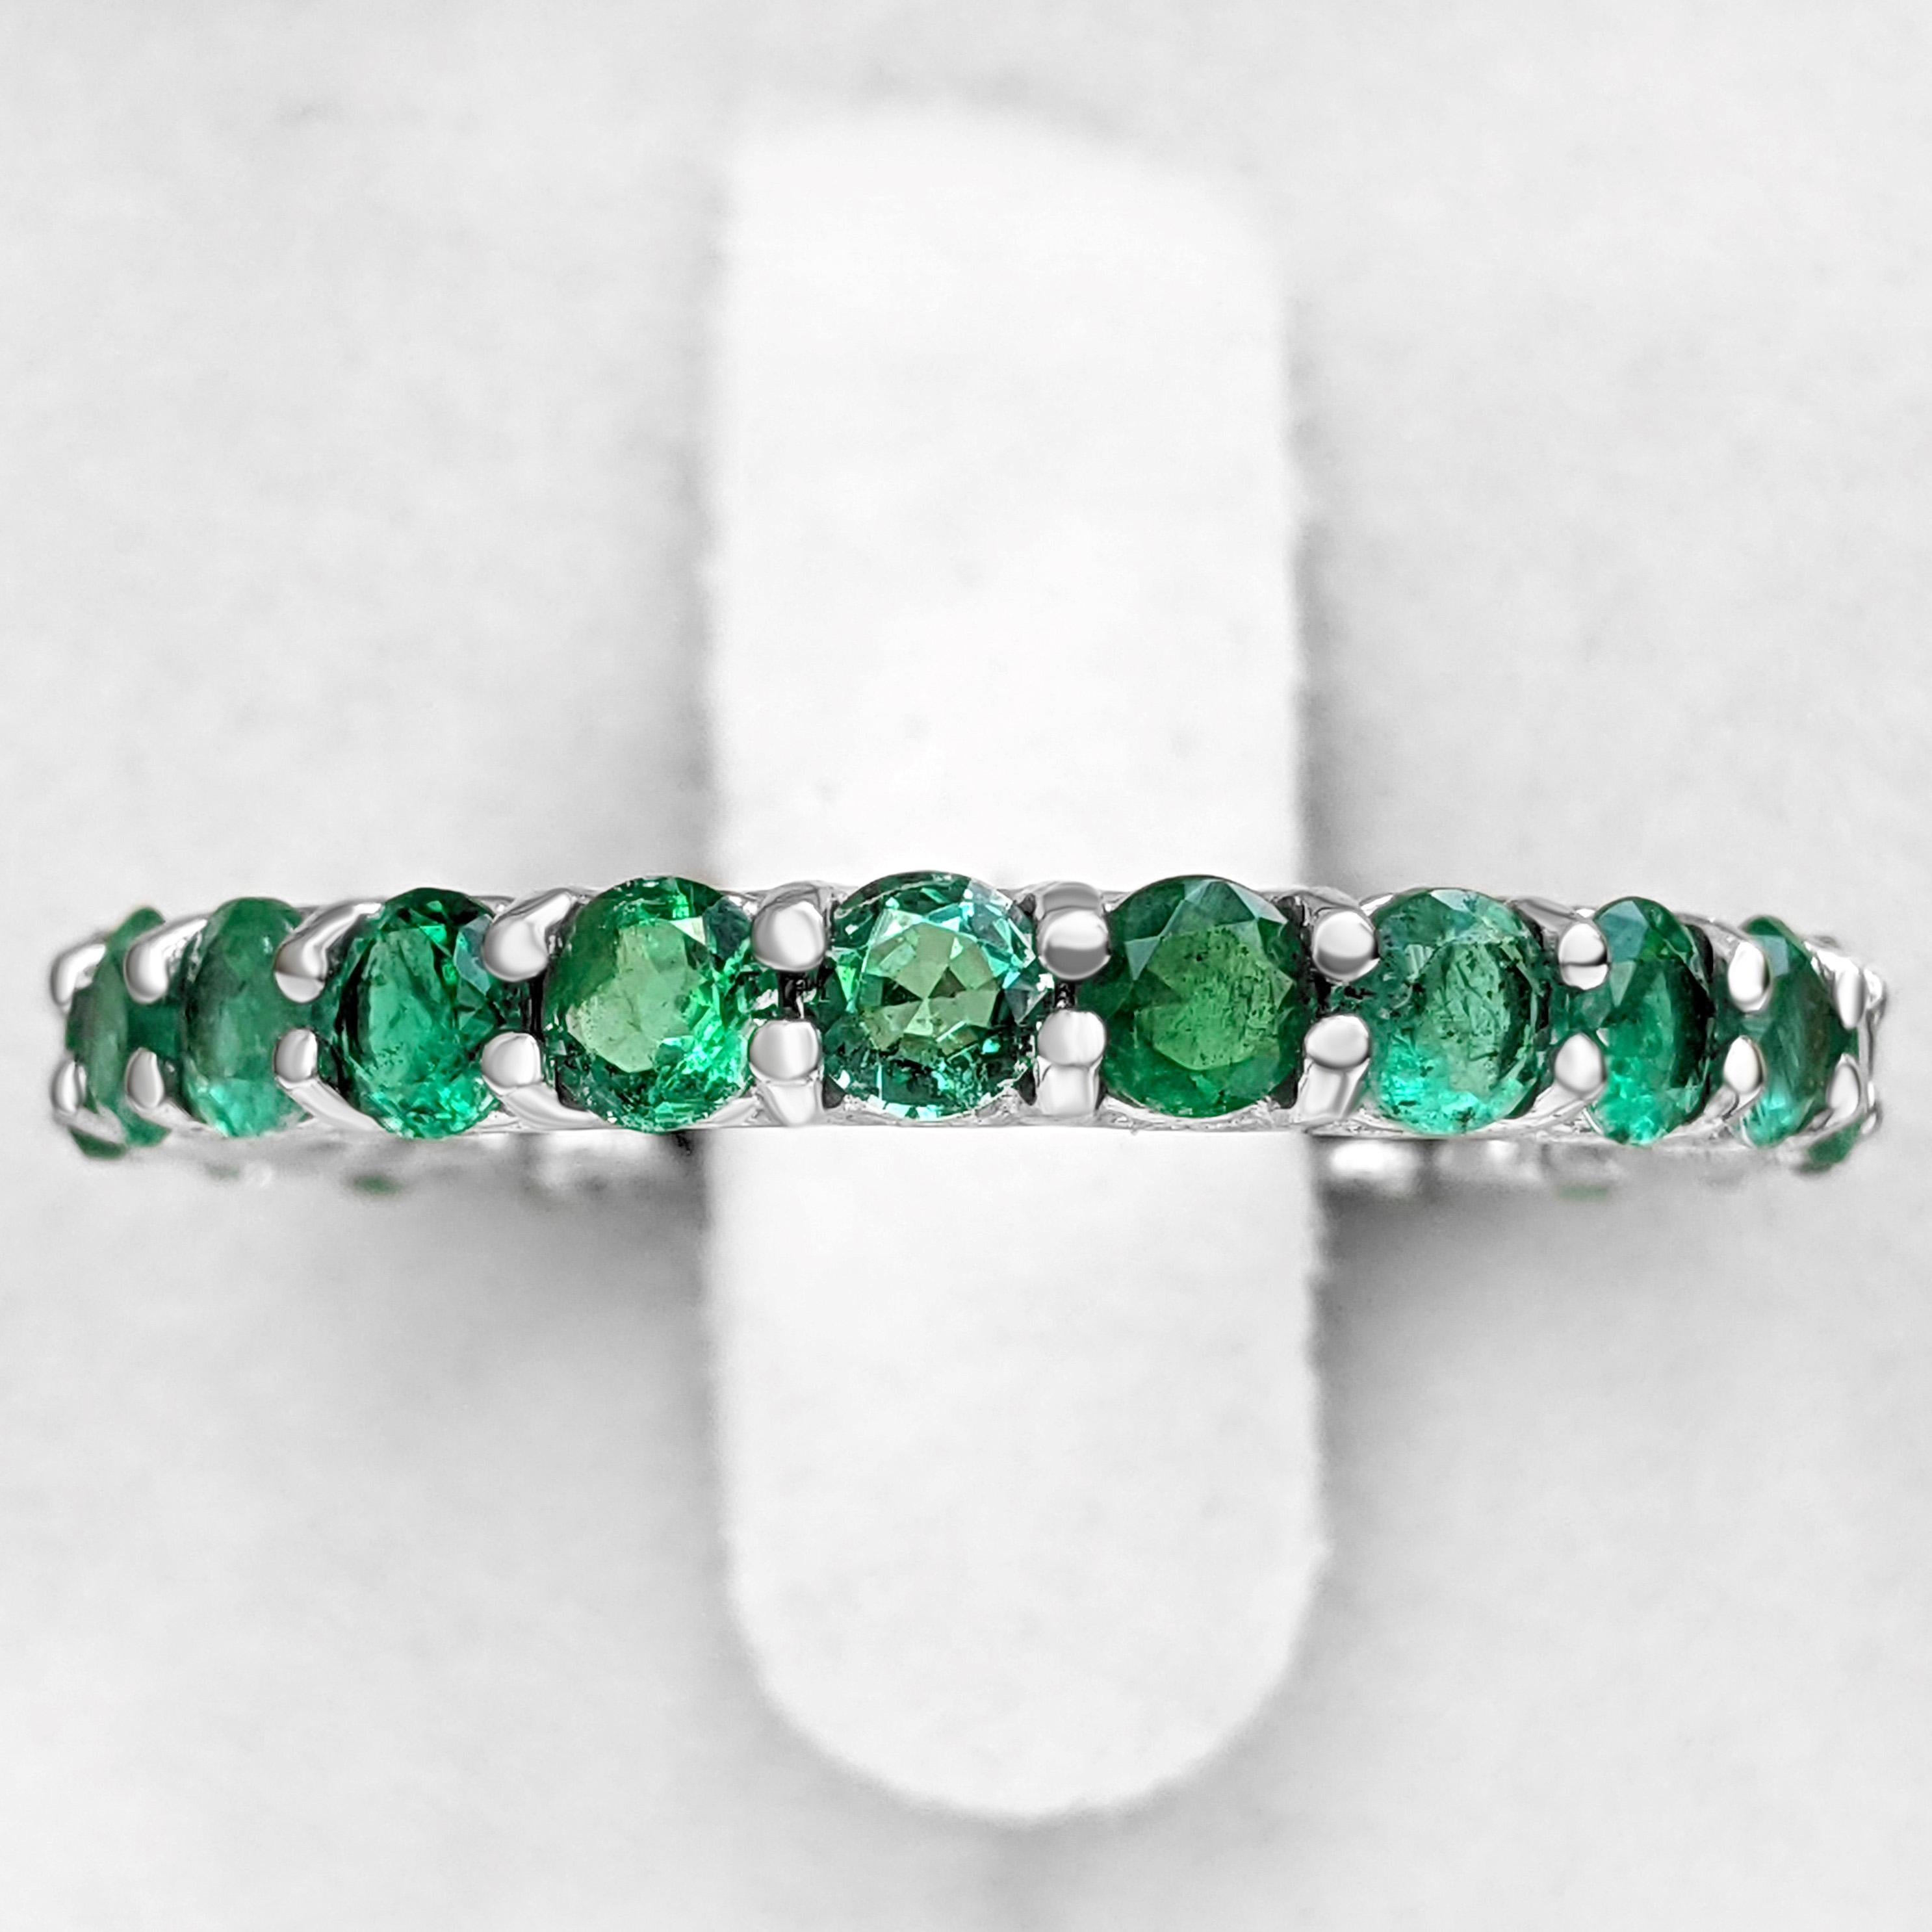 $1 NO RESERVE! - 2.32cttw Natural Emeralds Eternity Band, 14K White Gold  1